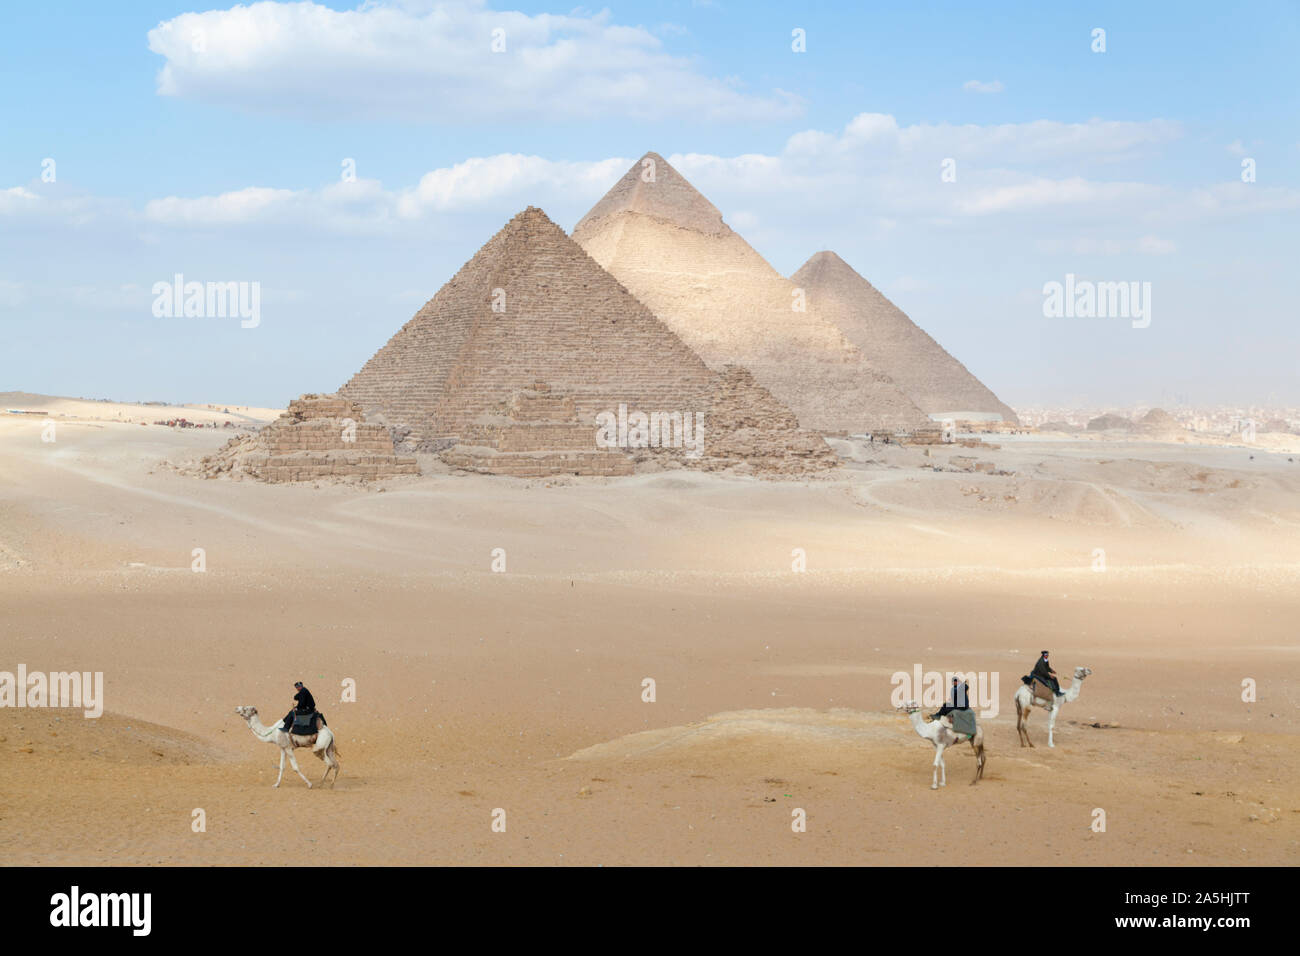 Egypt, Giza, the great Pyramids at Giza with men on camels. Stock Photo